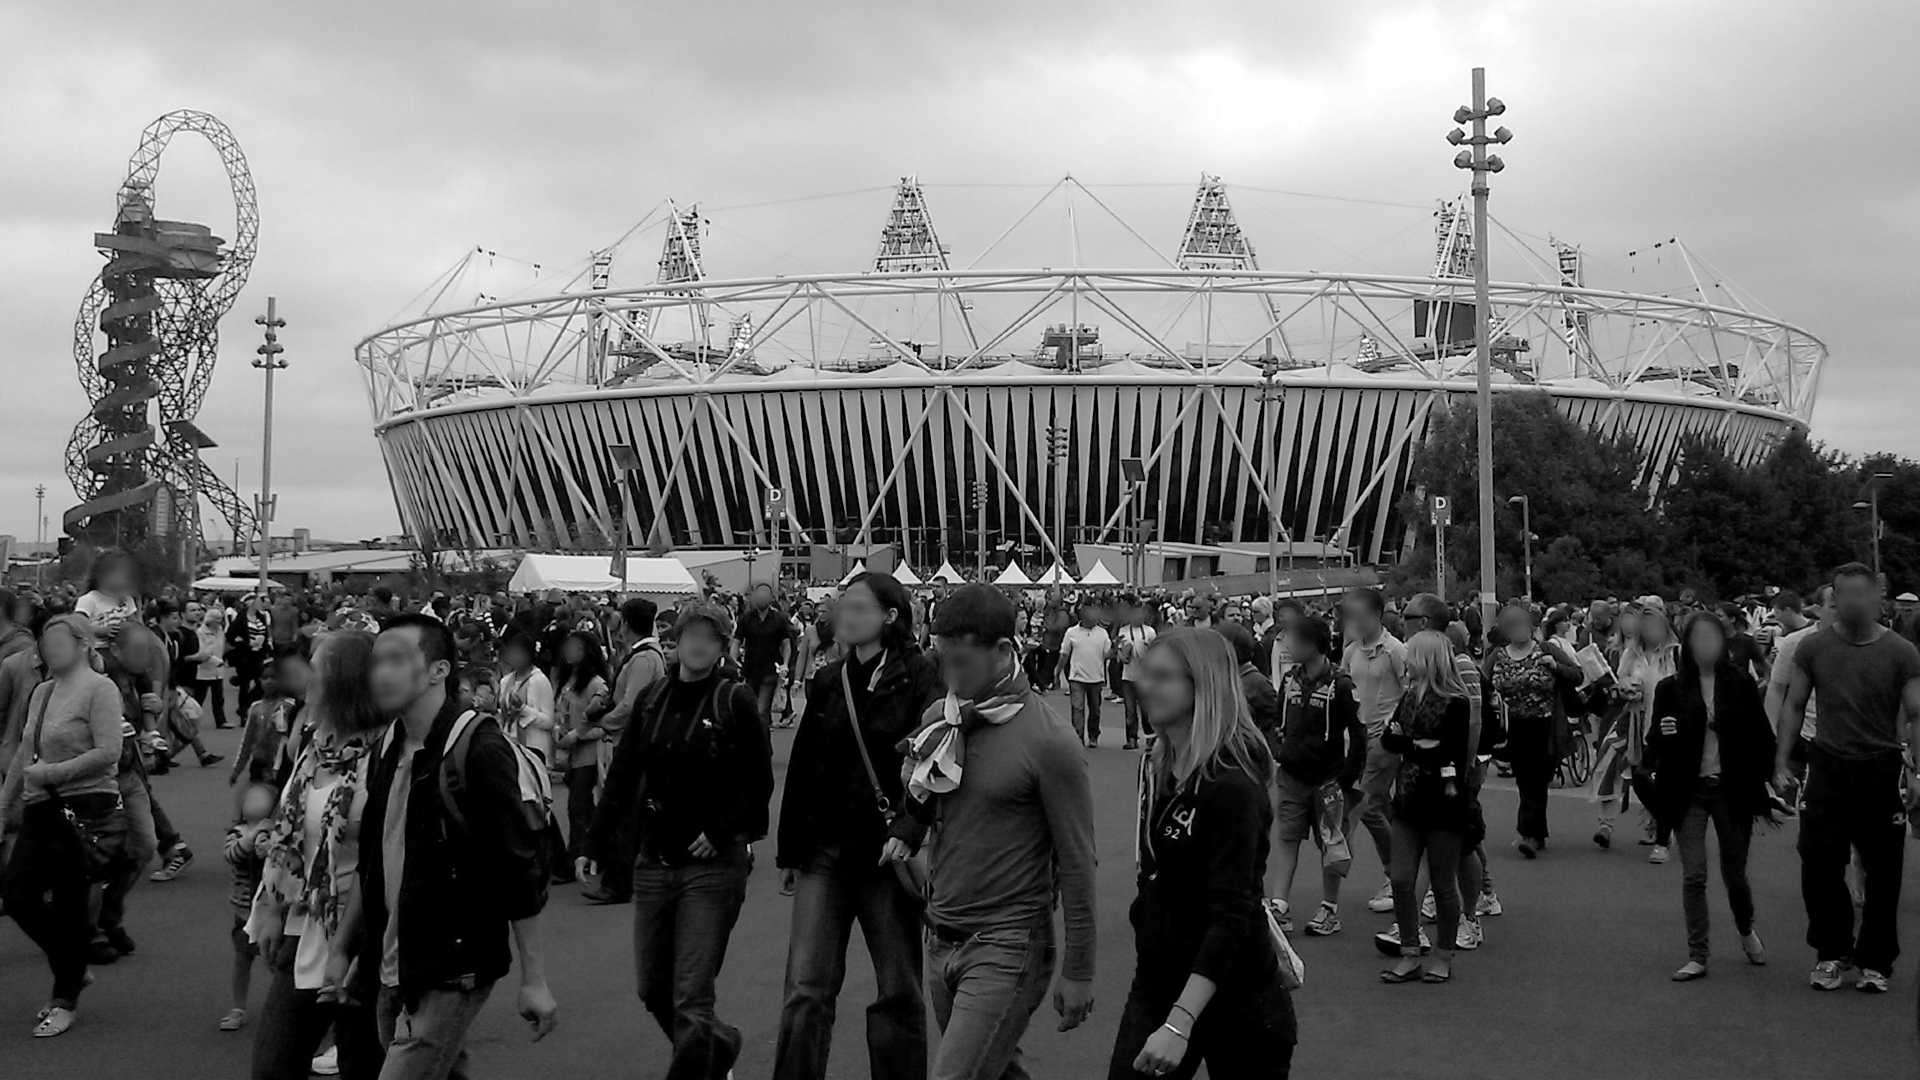 "Orbiting the Olympic Stadium" by Dan Brown, used under CC BY 2.0 / Cropped, desaturated and resampled from original